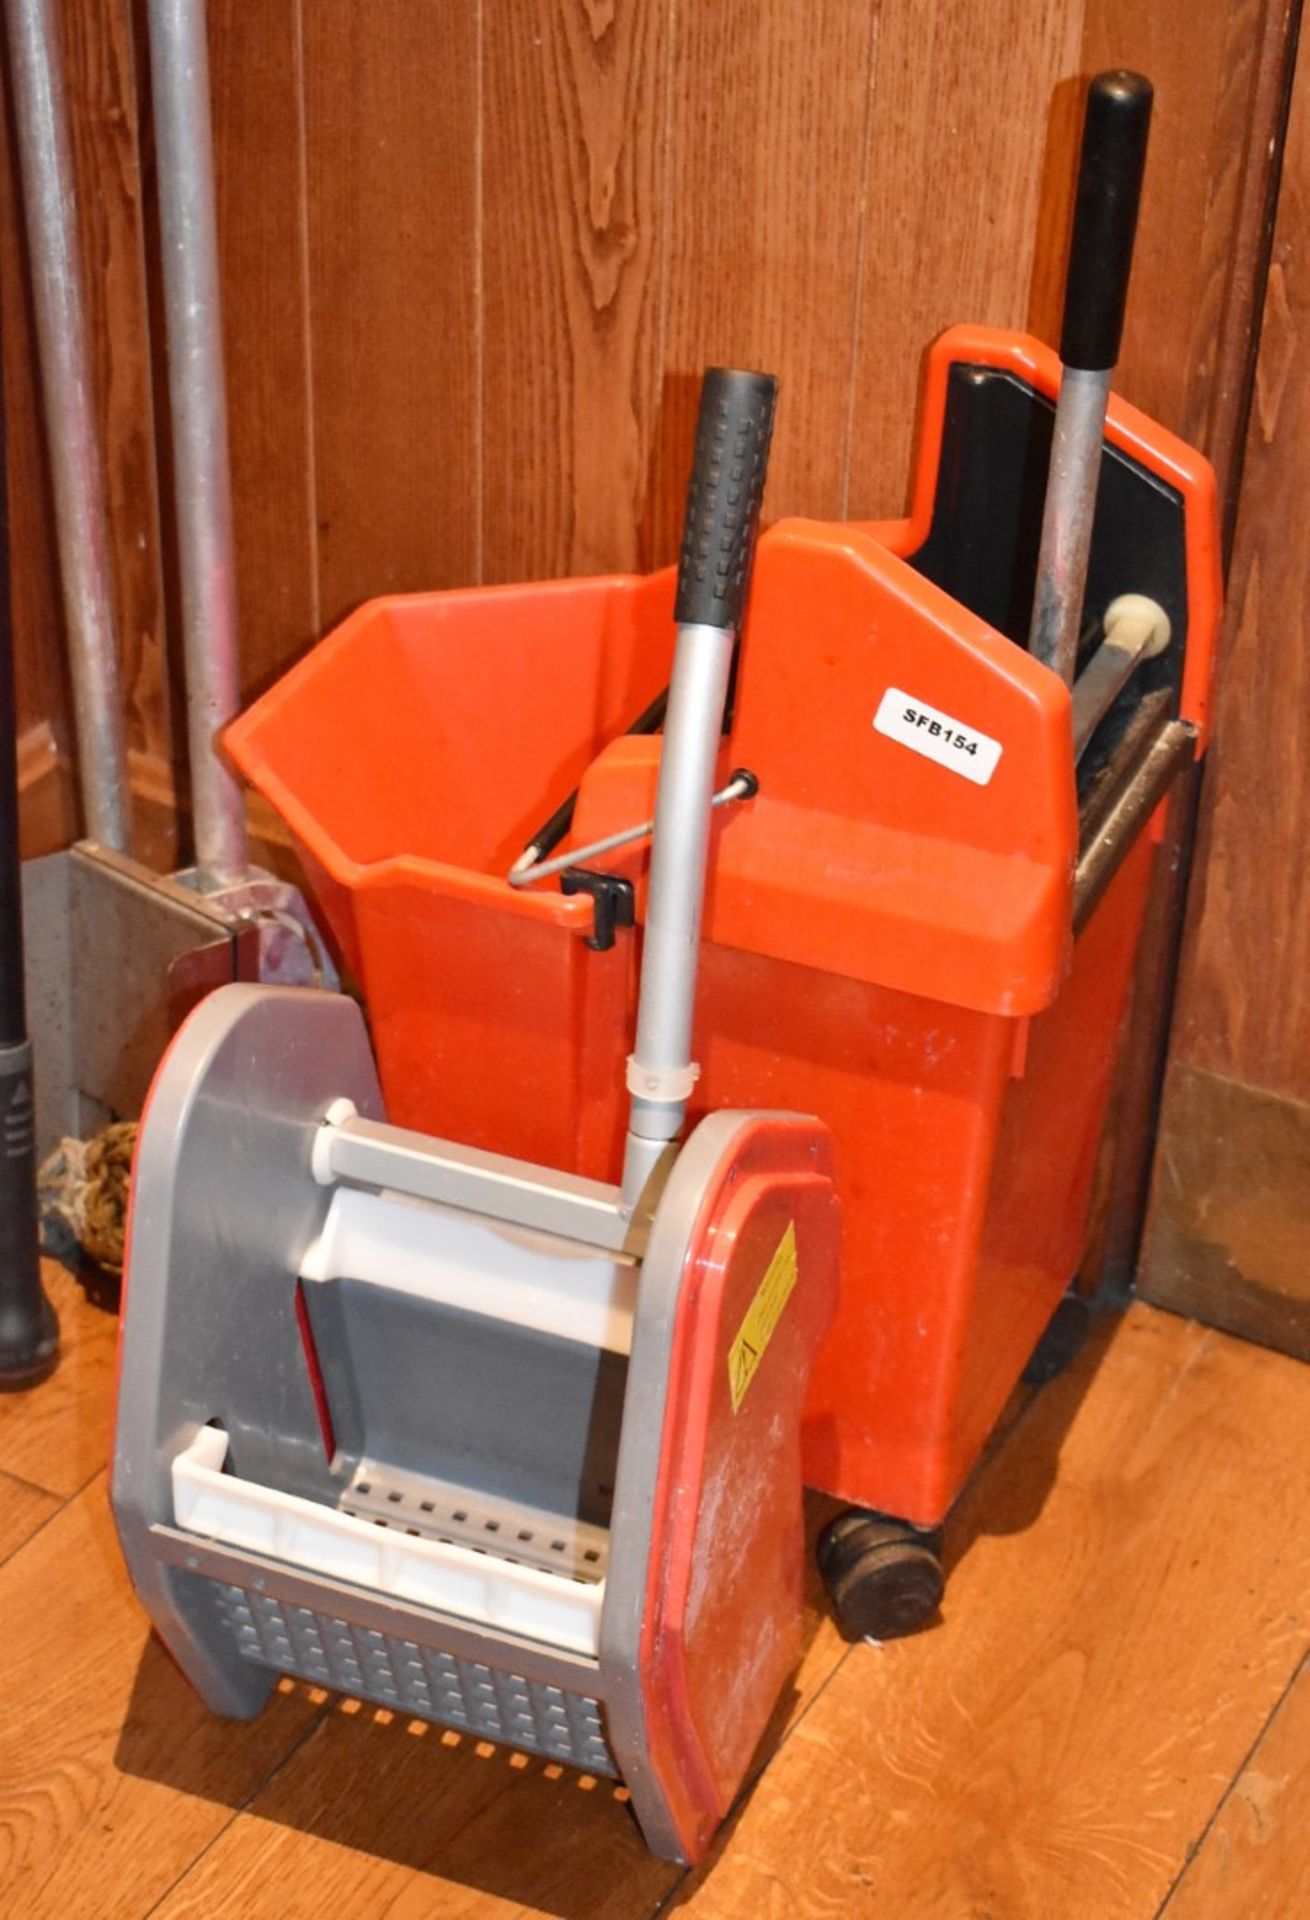 1 x Mop Bucket & Assorted Handles As Photographed - From a Popular Italian-American Diner - Image 3 of 3